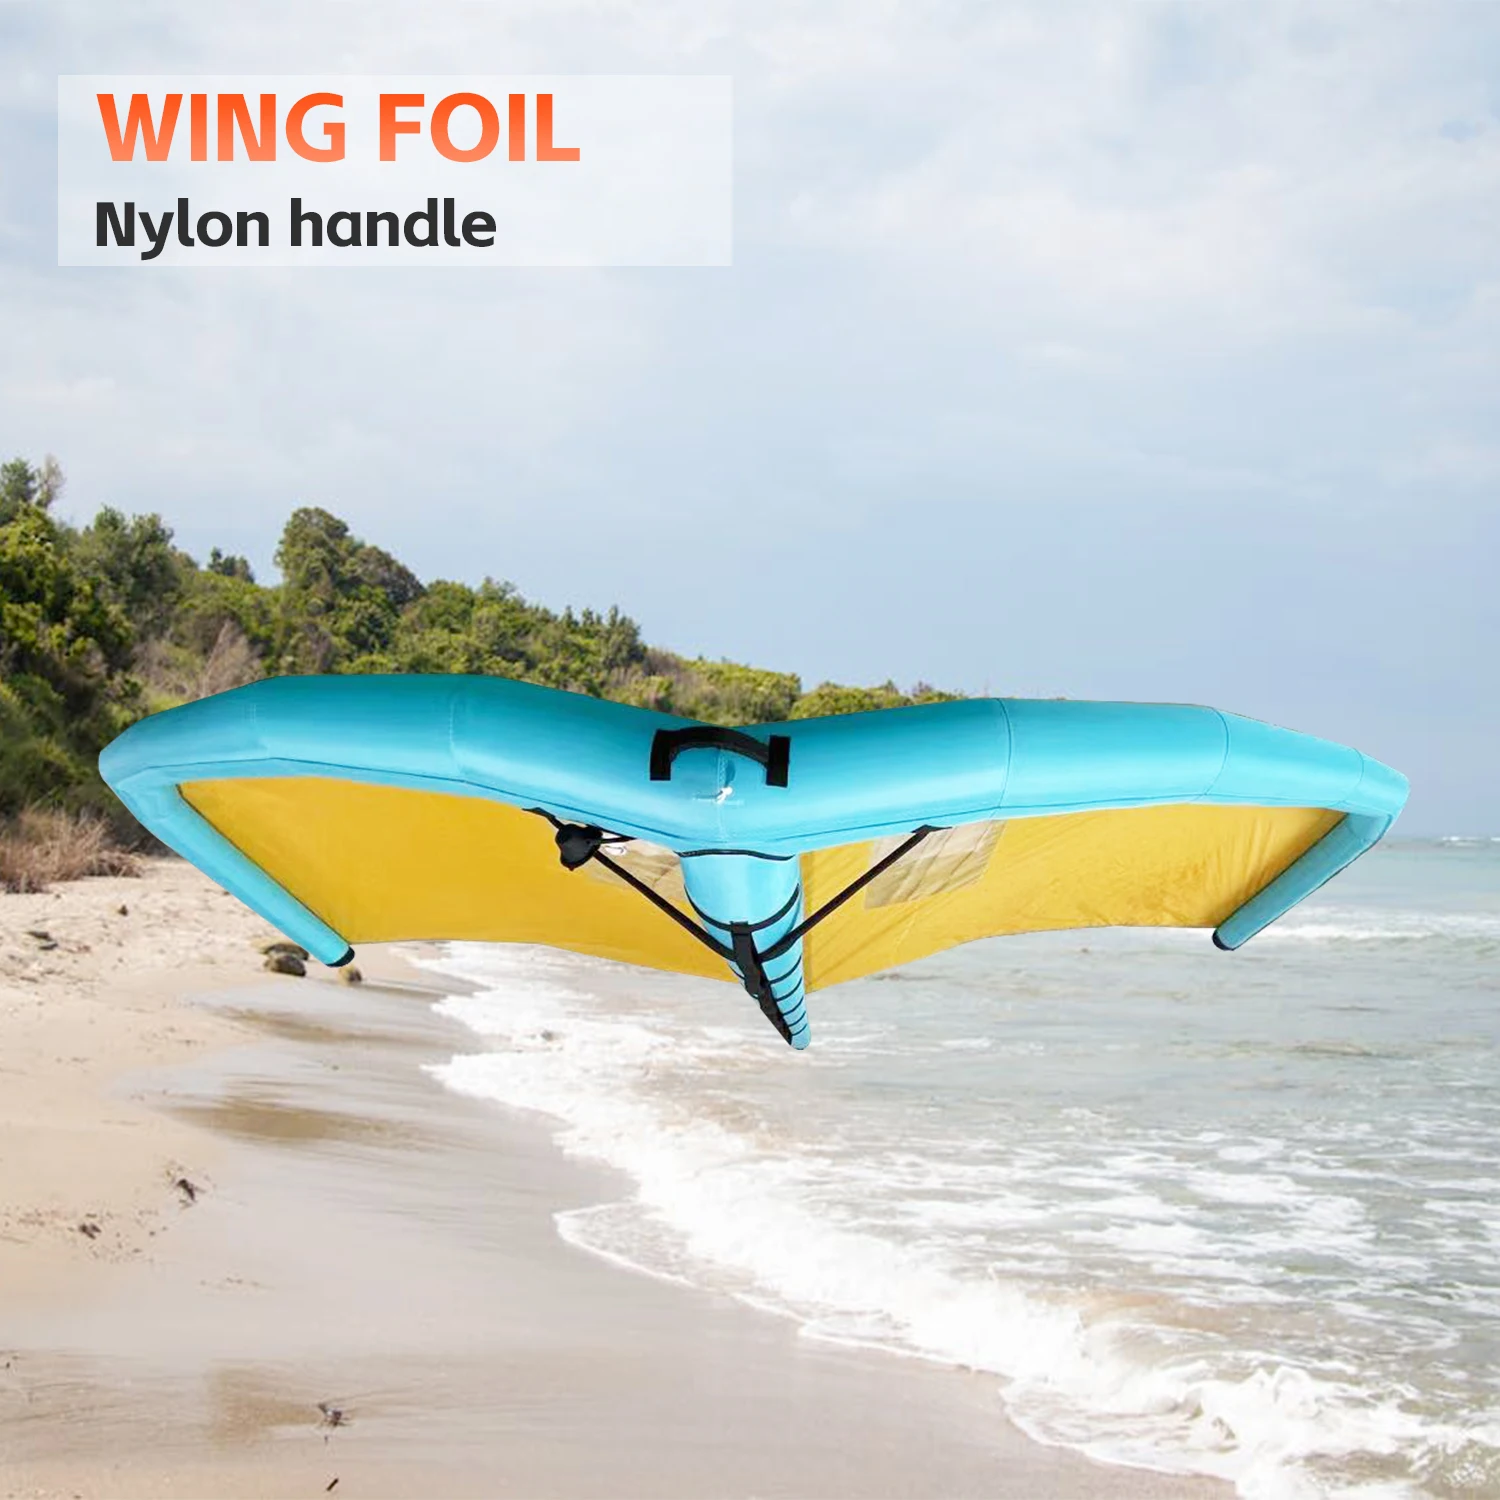 hot sale new style 5m independent air bag carbon fiber wing foil universal hydrofoil surfing hard handle accessory Handheld V-Shape 3M/4M/5M/6M Wingfoil Kitesurf Kit Waterplay SUP Hydrofoil Board Inflatable Wing Foil Wind Surf Accessory